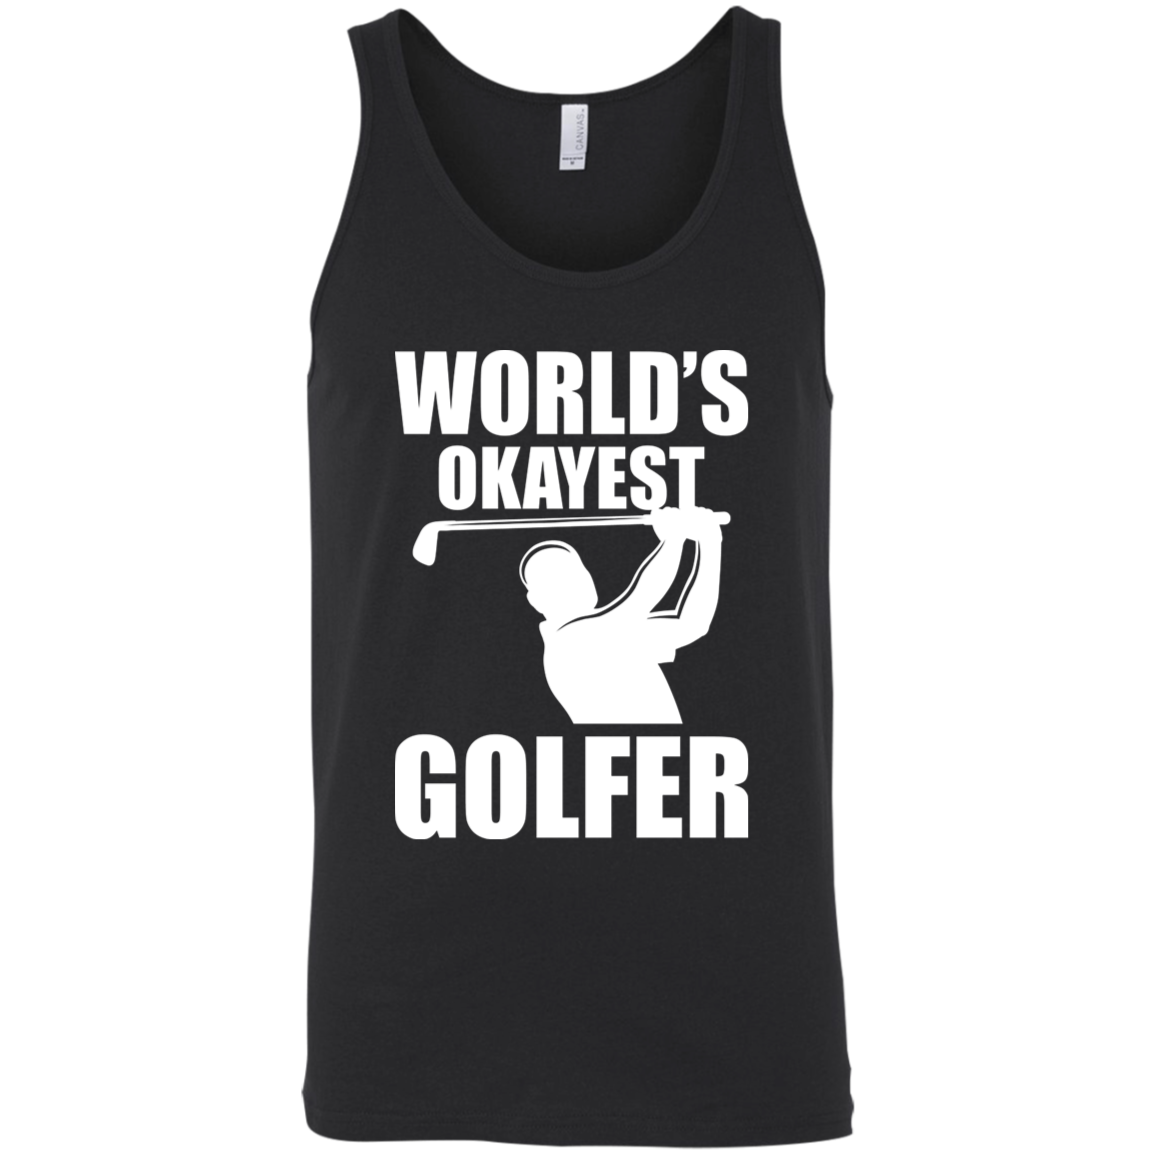 World's Okayest Golfer Tank Top Apparel - The Beer Lodge